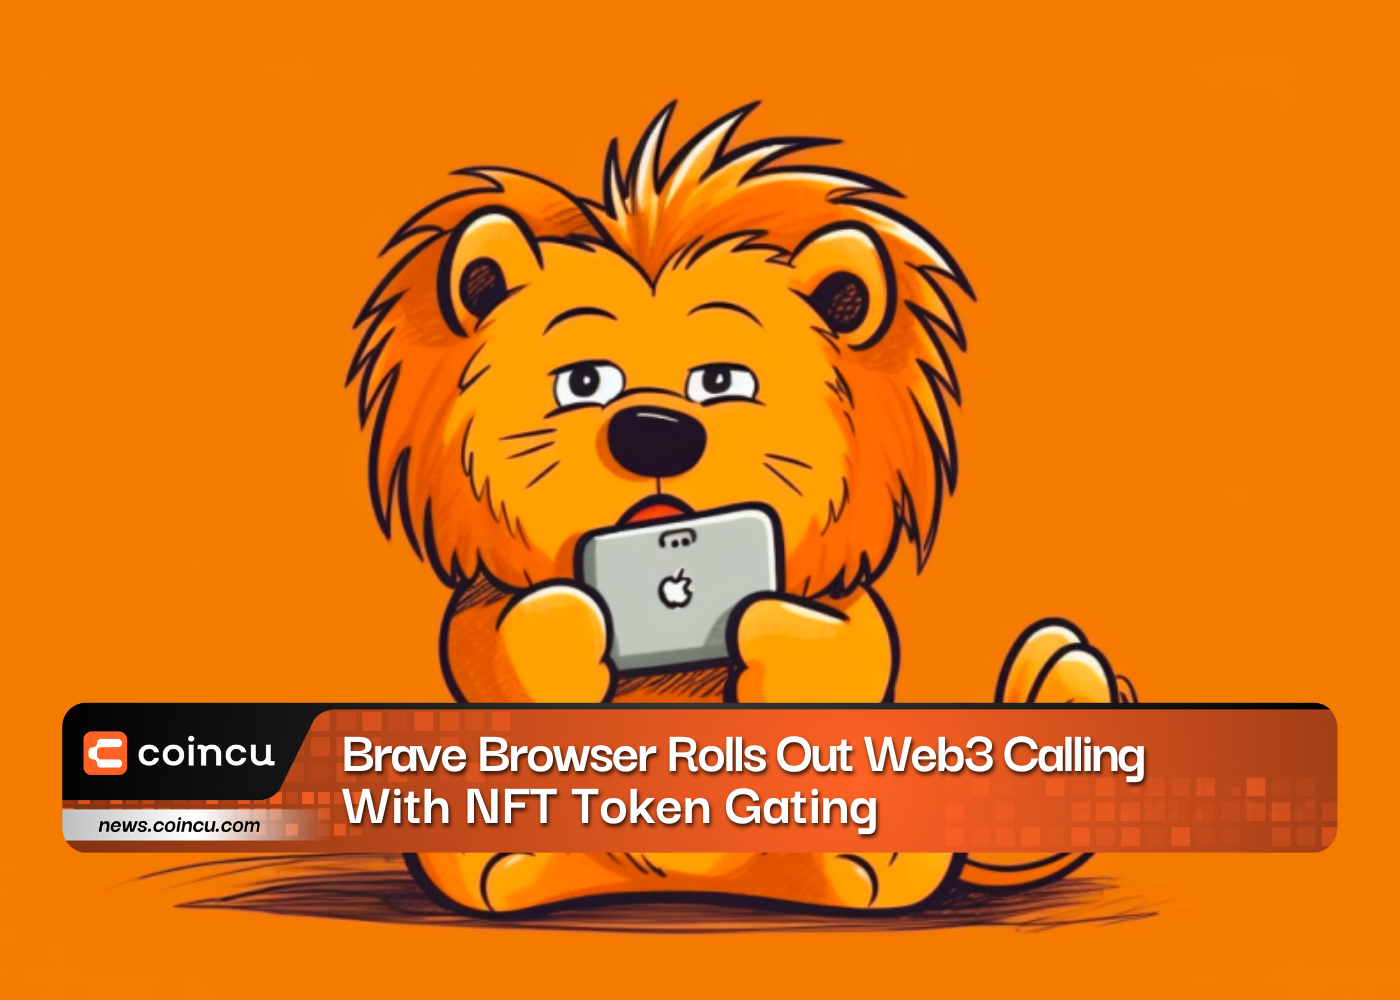 Brave Browser Rolls Out Web3 Calling With NFT Token Gating